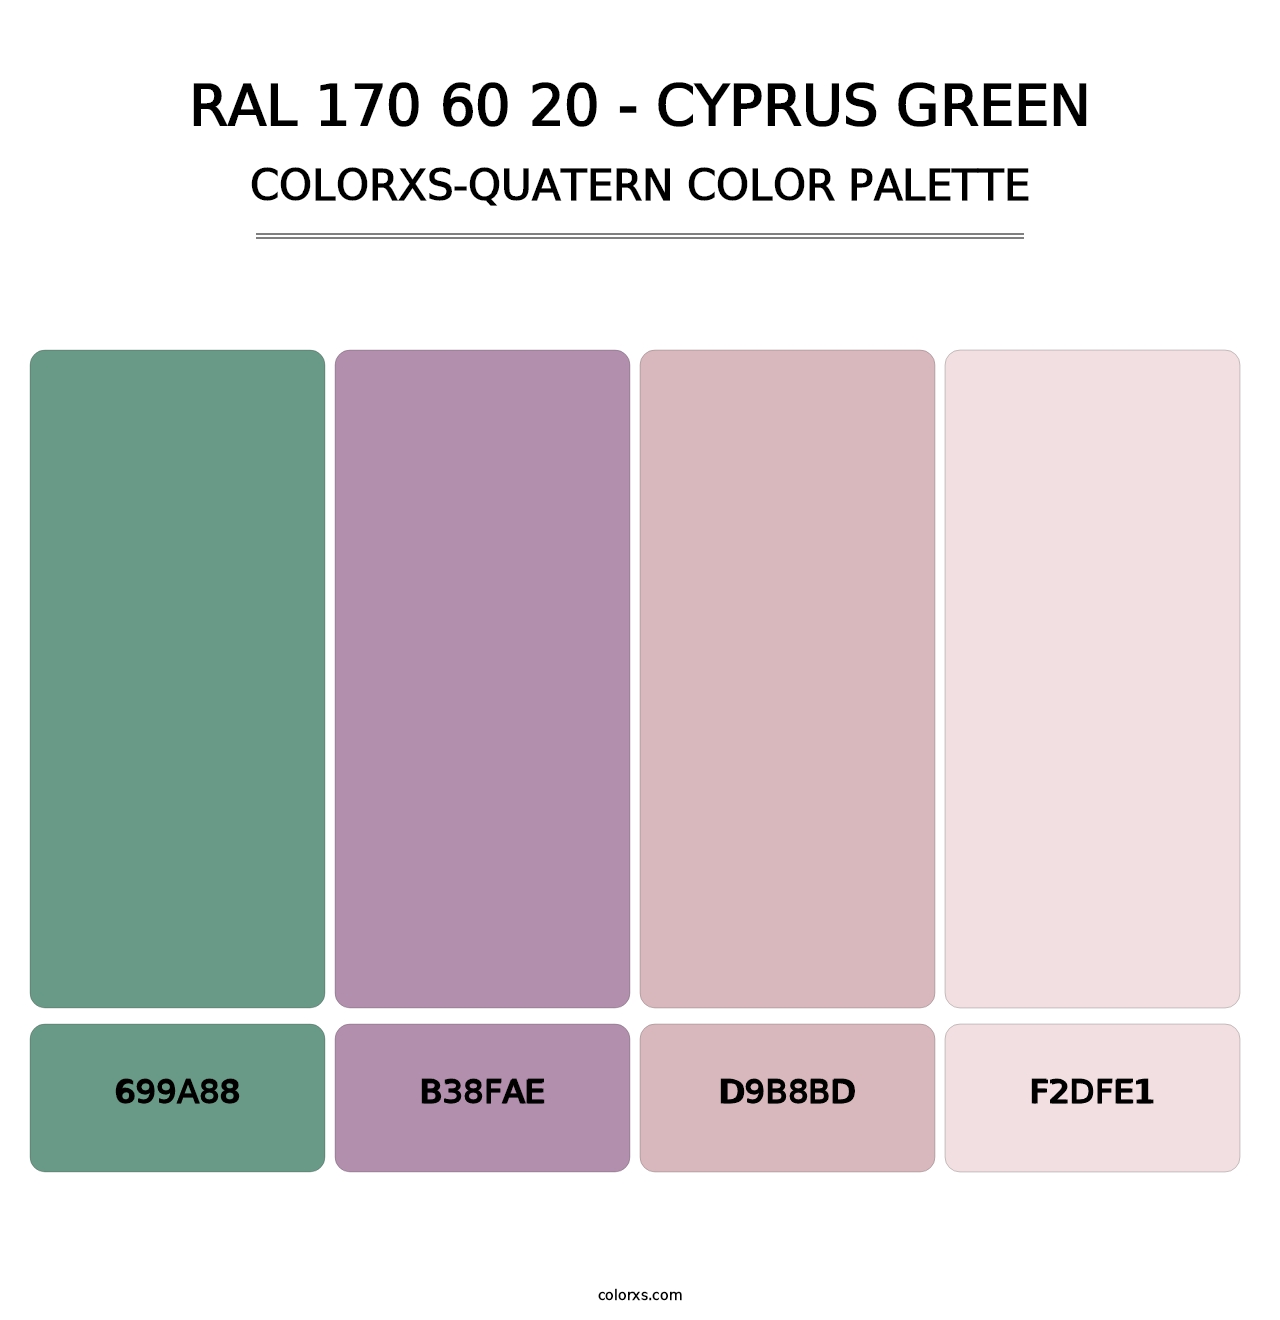 RAL 170 60 20 - Cyprus Green - Colorxs Quatern Palette